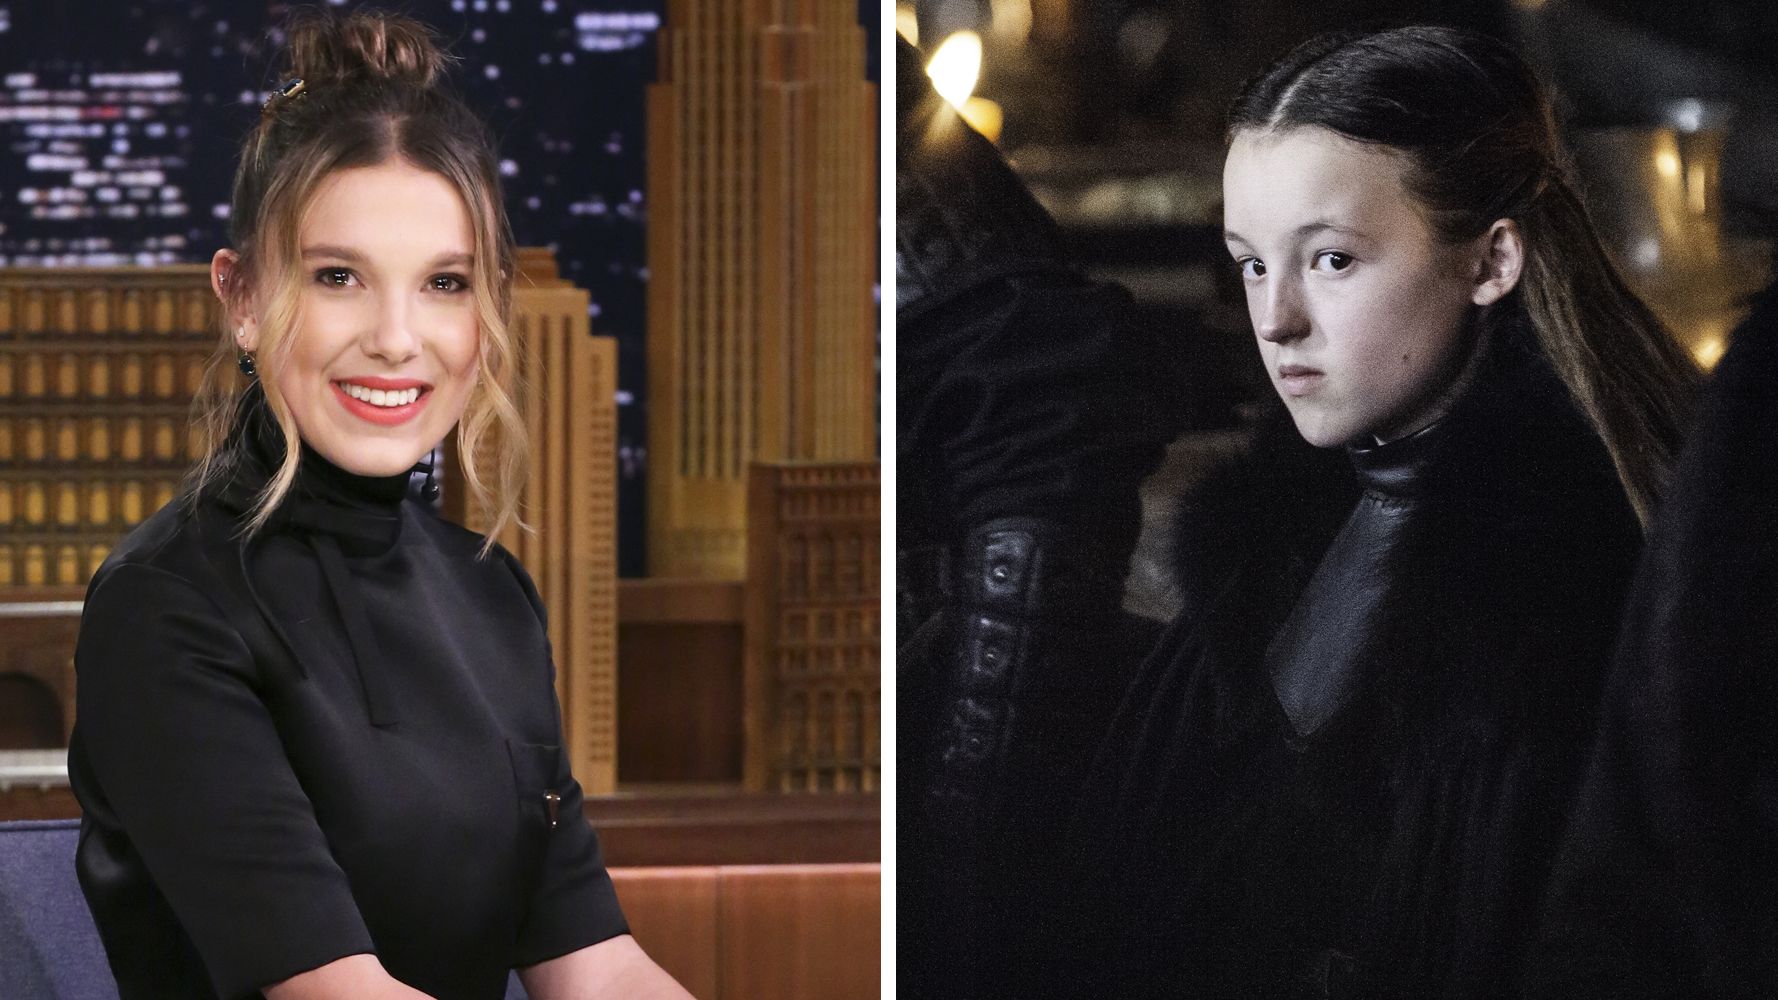 At 19, Millie Bobby Brown Knows Exactly Who She Is